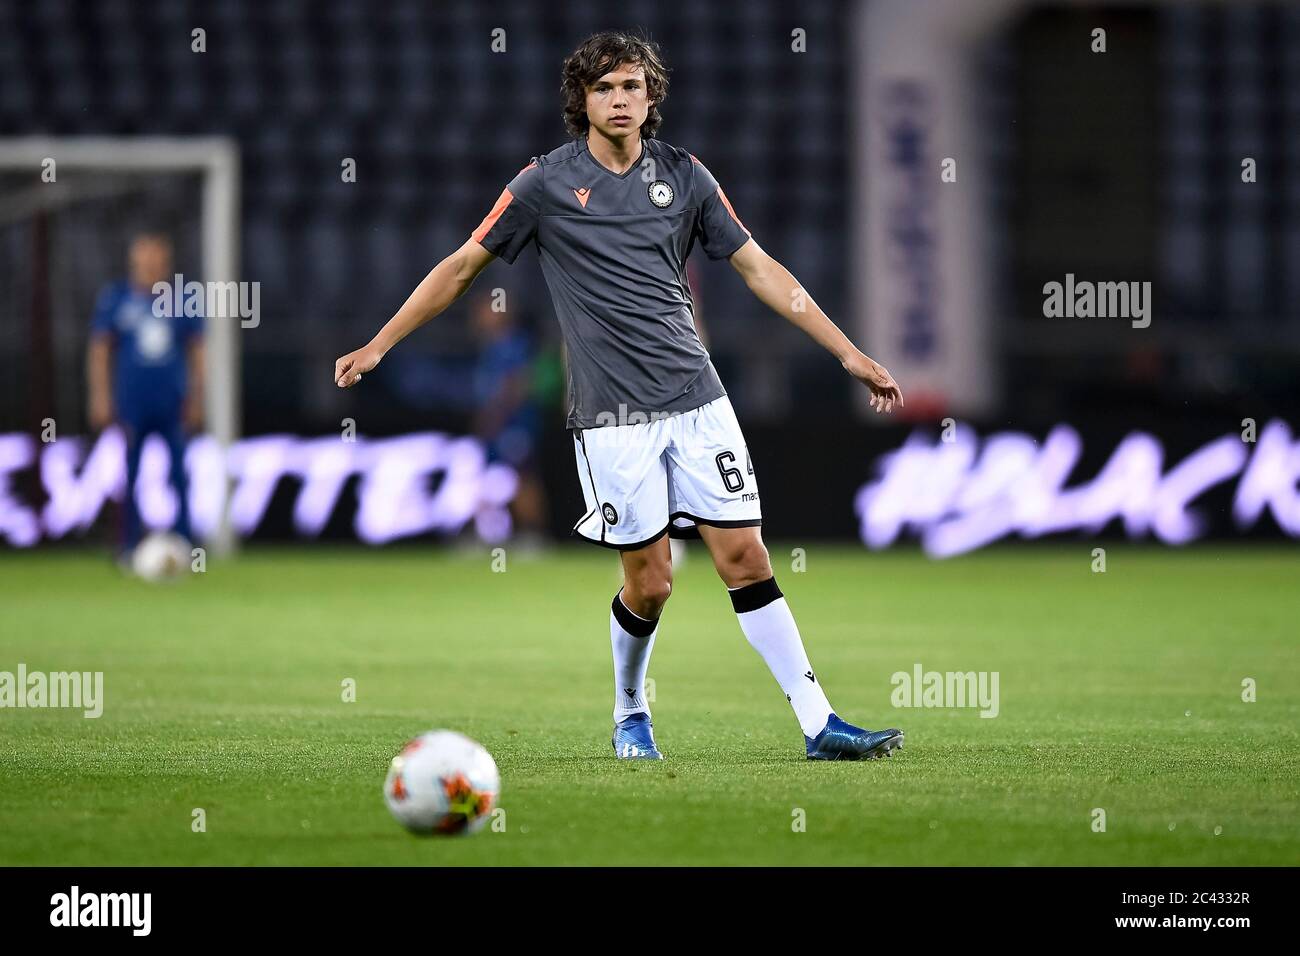 Turin, Italy - 23 June, 2020: Martin Palumbo of Udinese Calcio in action during warm up prior to the Serie A football match between Torino FC and Udinese Calcio. Credit: Nicolò Campo/Alamy Live News Stock Photo